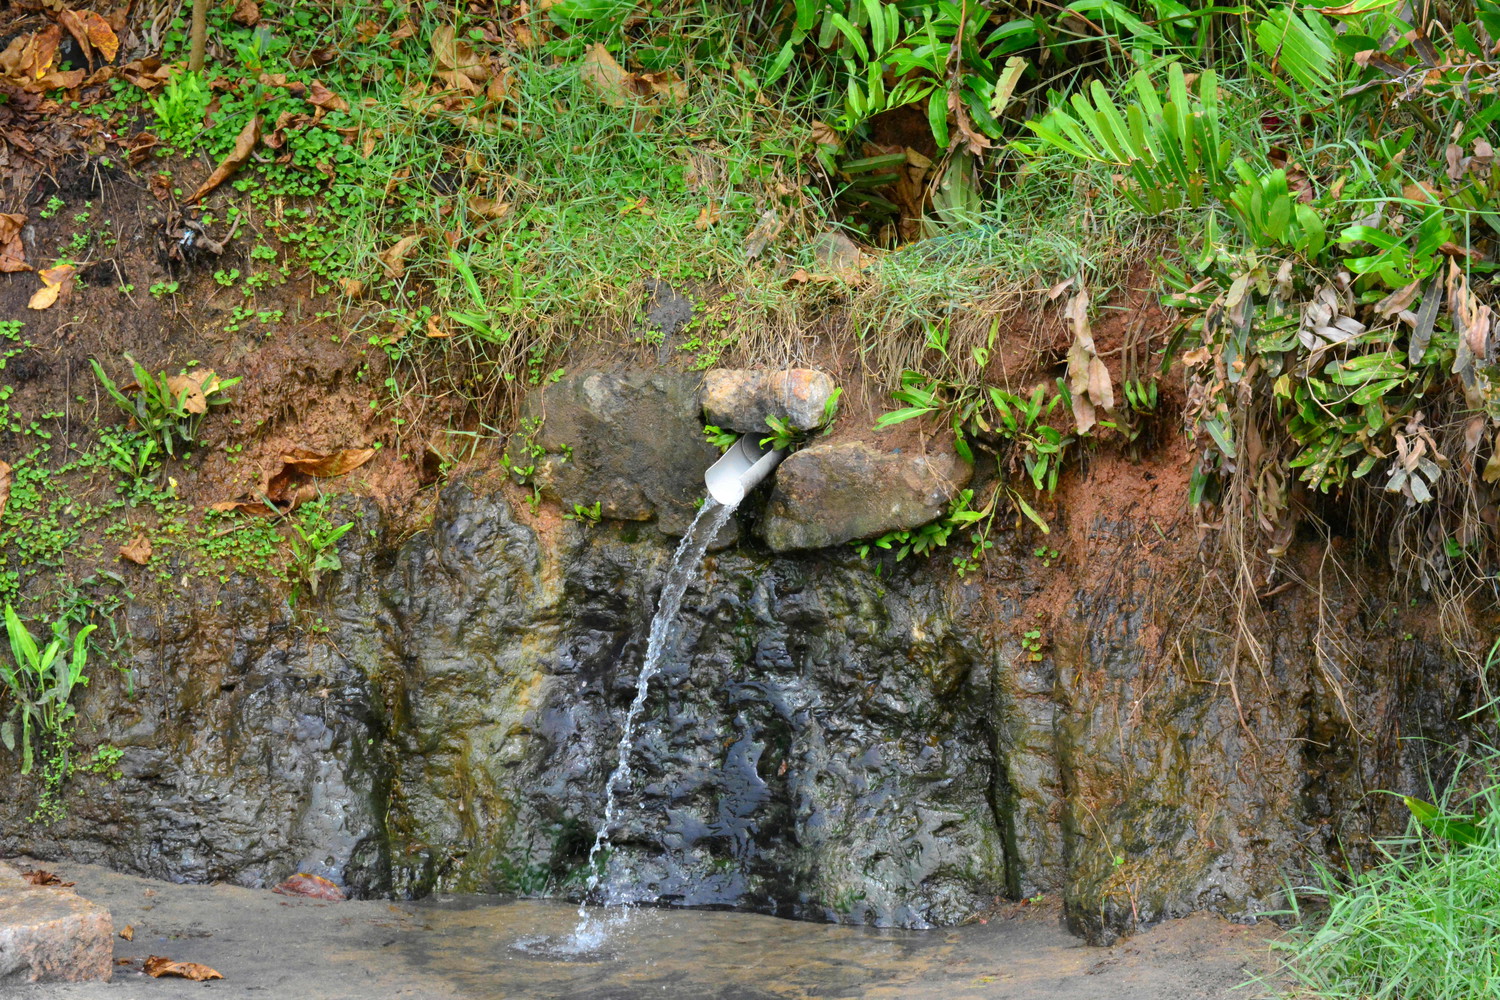 Natural spring water flowing out of a pipe drilled into the rocks at the foot of a cliff